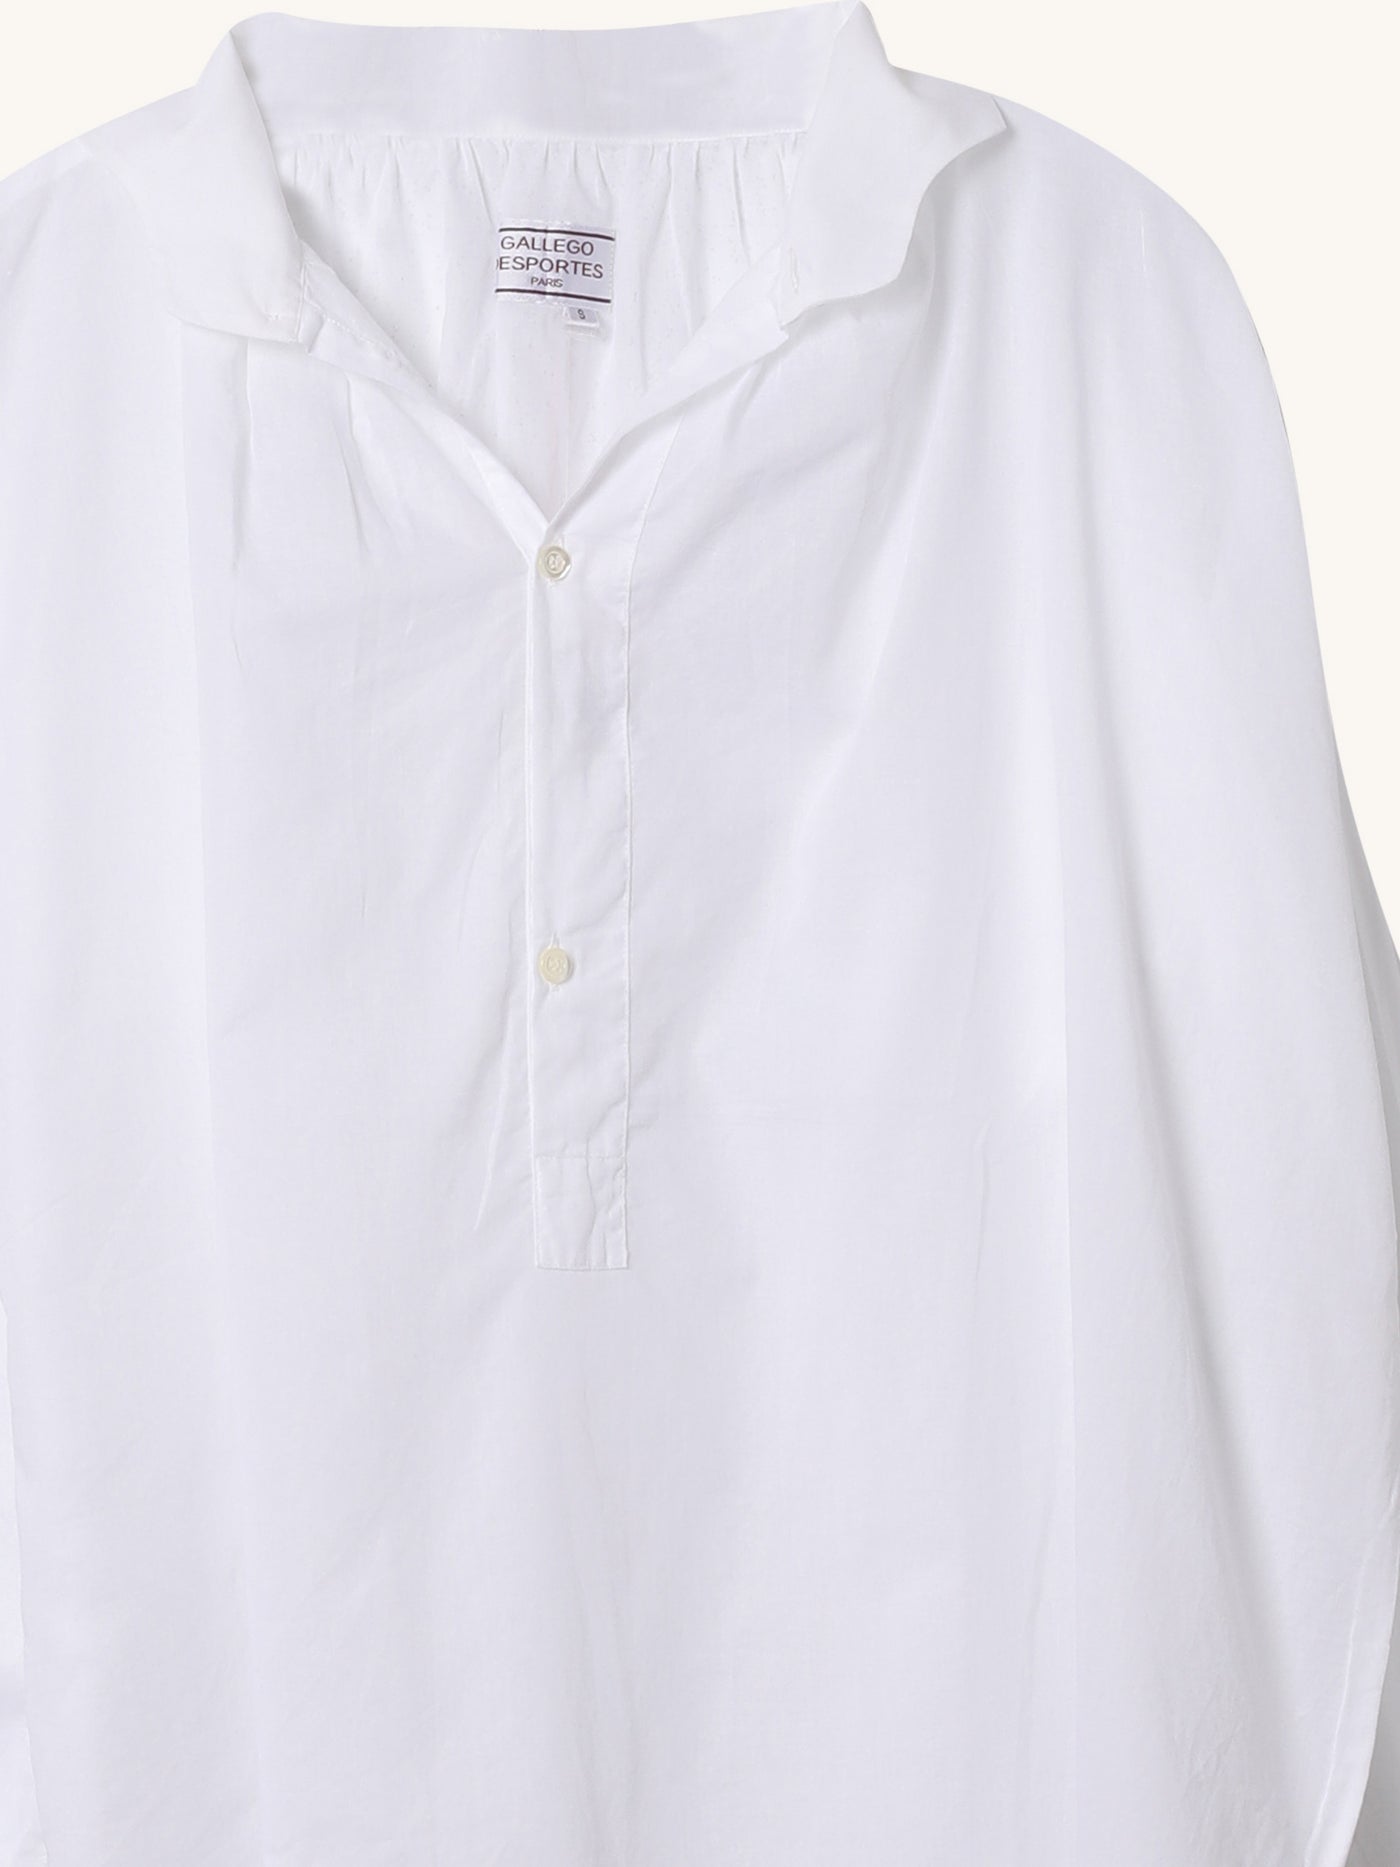 White Sheer Voile Tunic